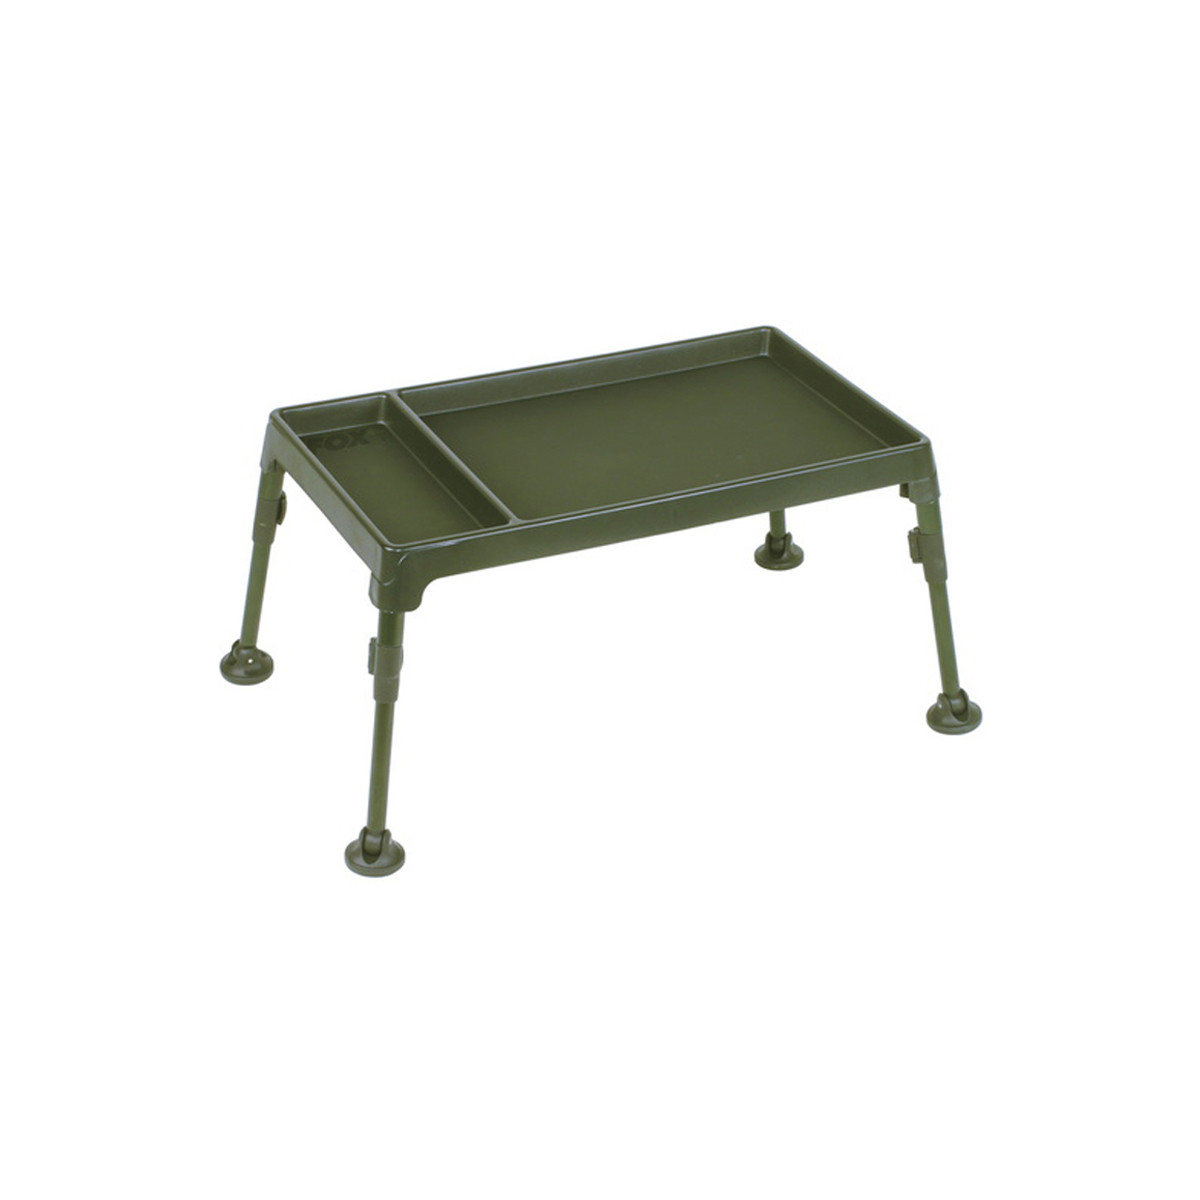 FOX BIVVY TABLE WITH DIVIDE